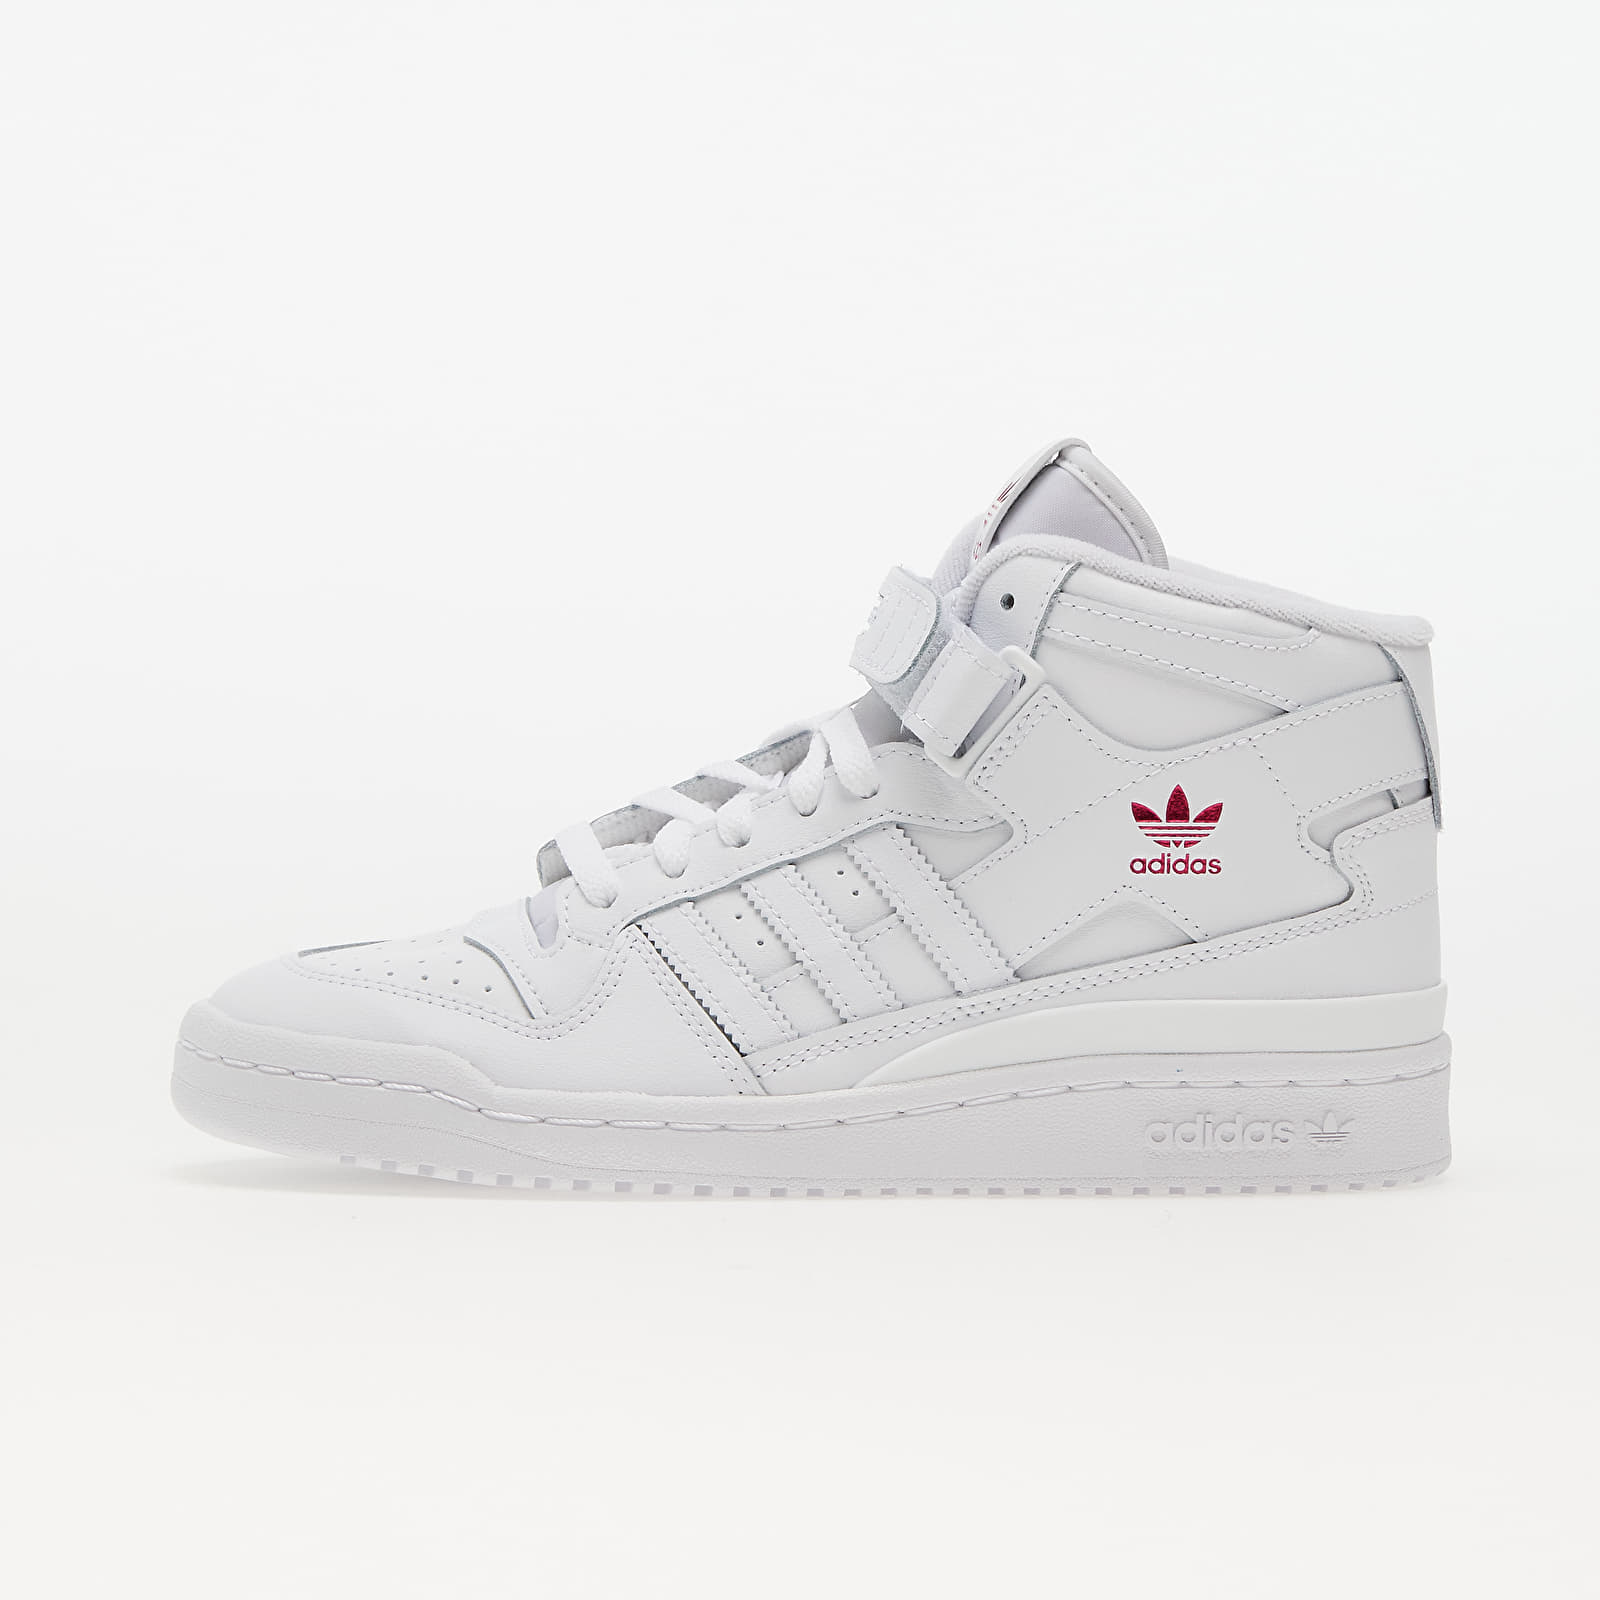 Women's shoes adidas Forum Mid W Ftw White/ Ftw White/ Shock Pink